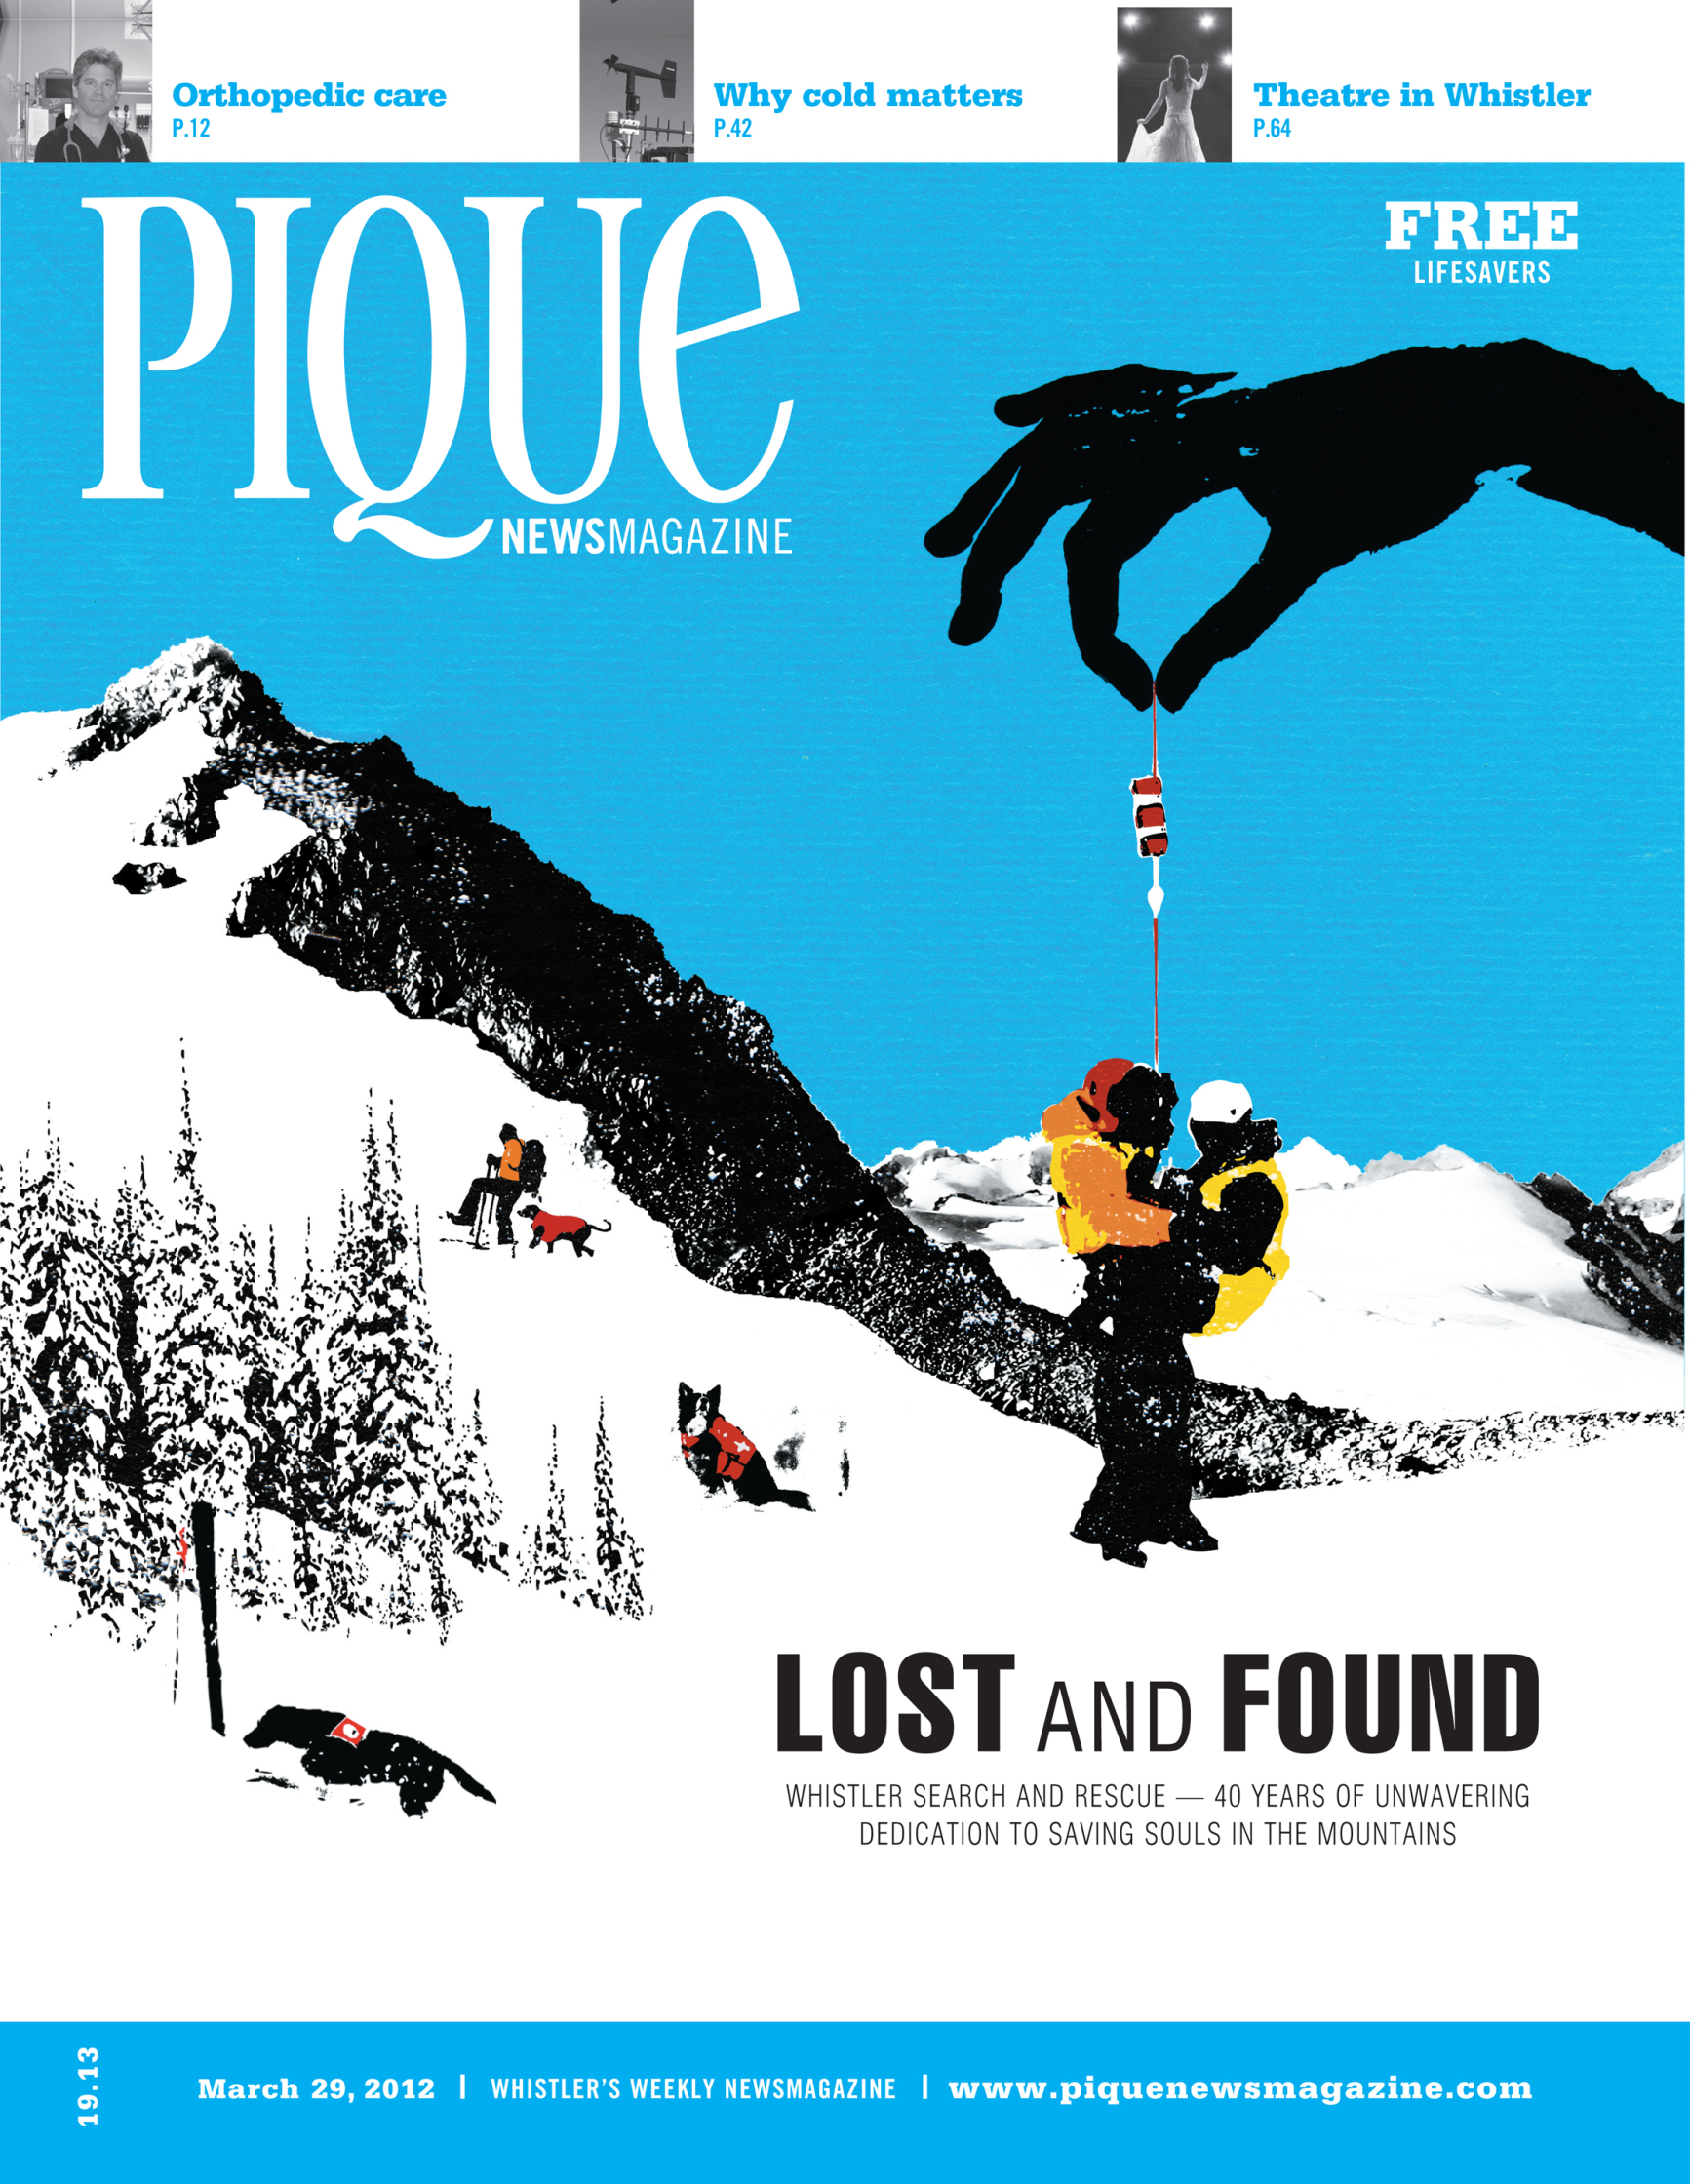 Lost and Found / PIQUE